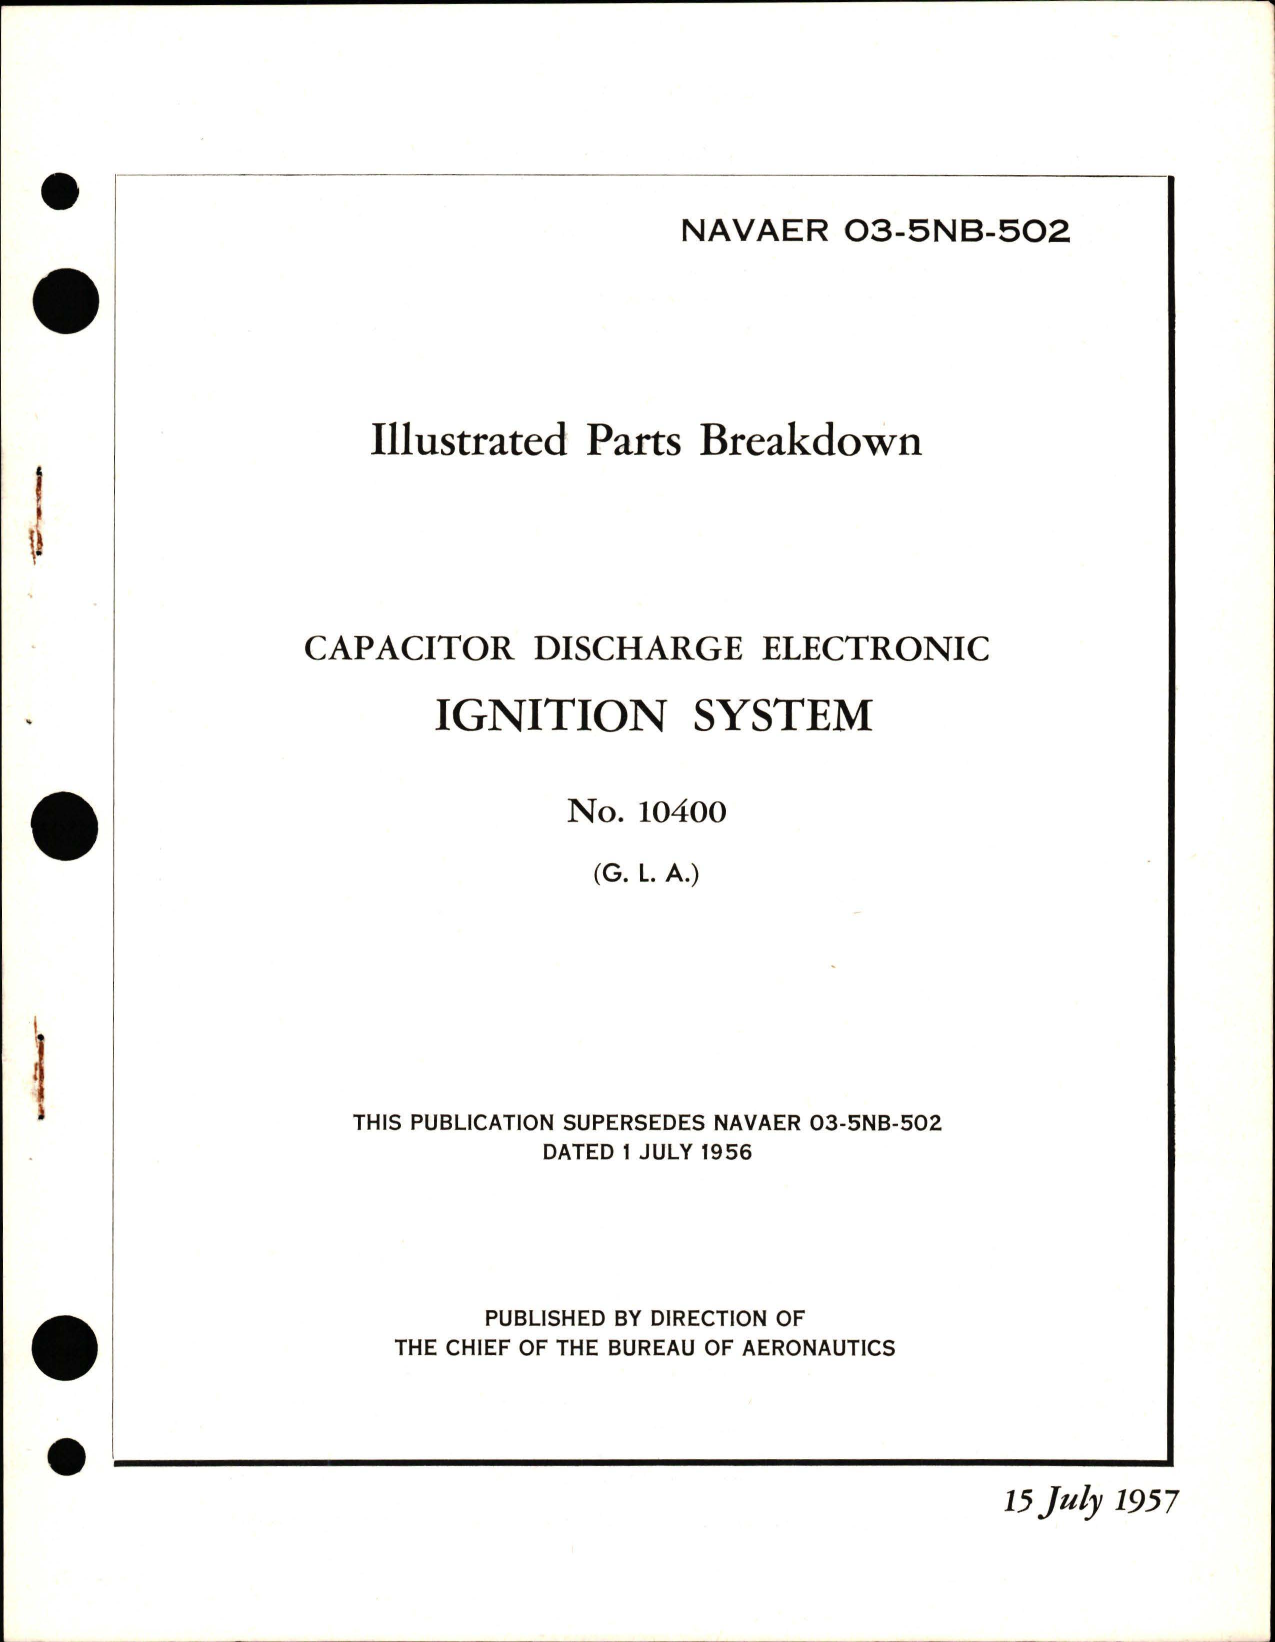 Sample page 1 from AirCorps Library document: Illustrated Parts Breakdown for Capacitor Discharge Electronic Ignition System - No 10400 